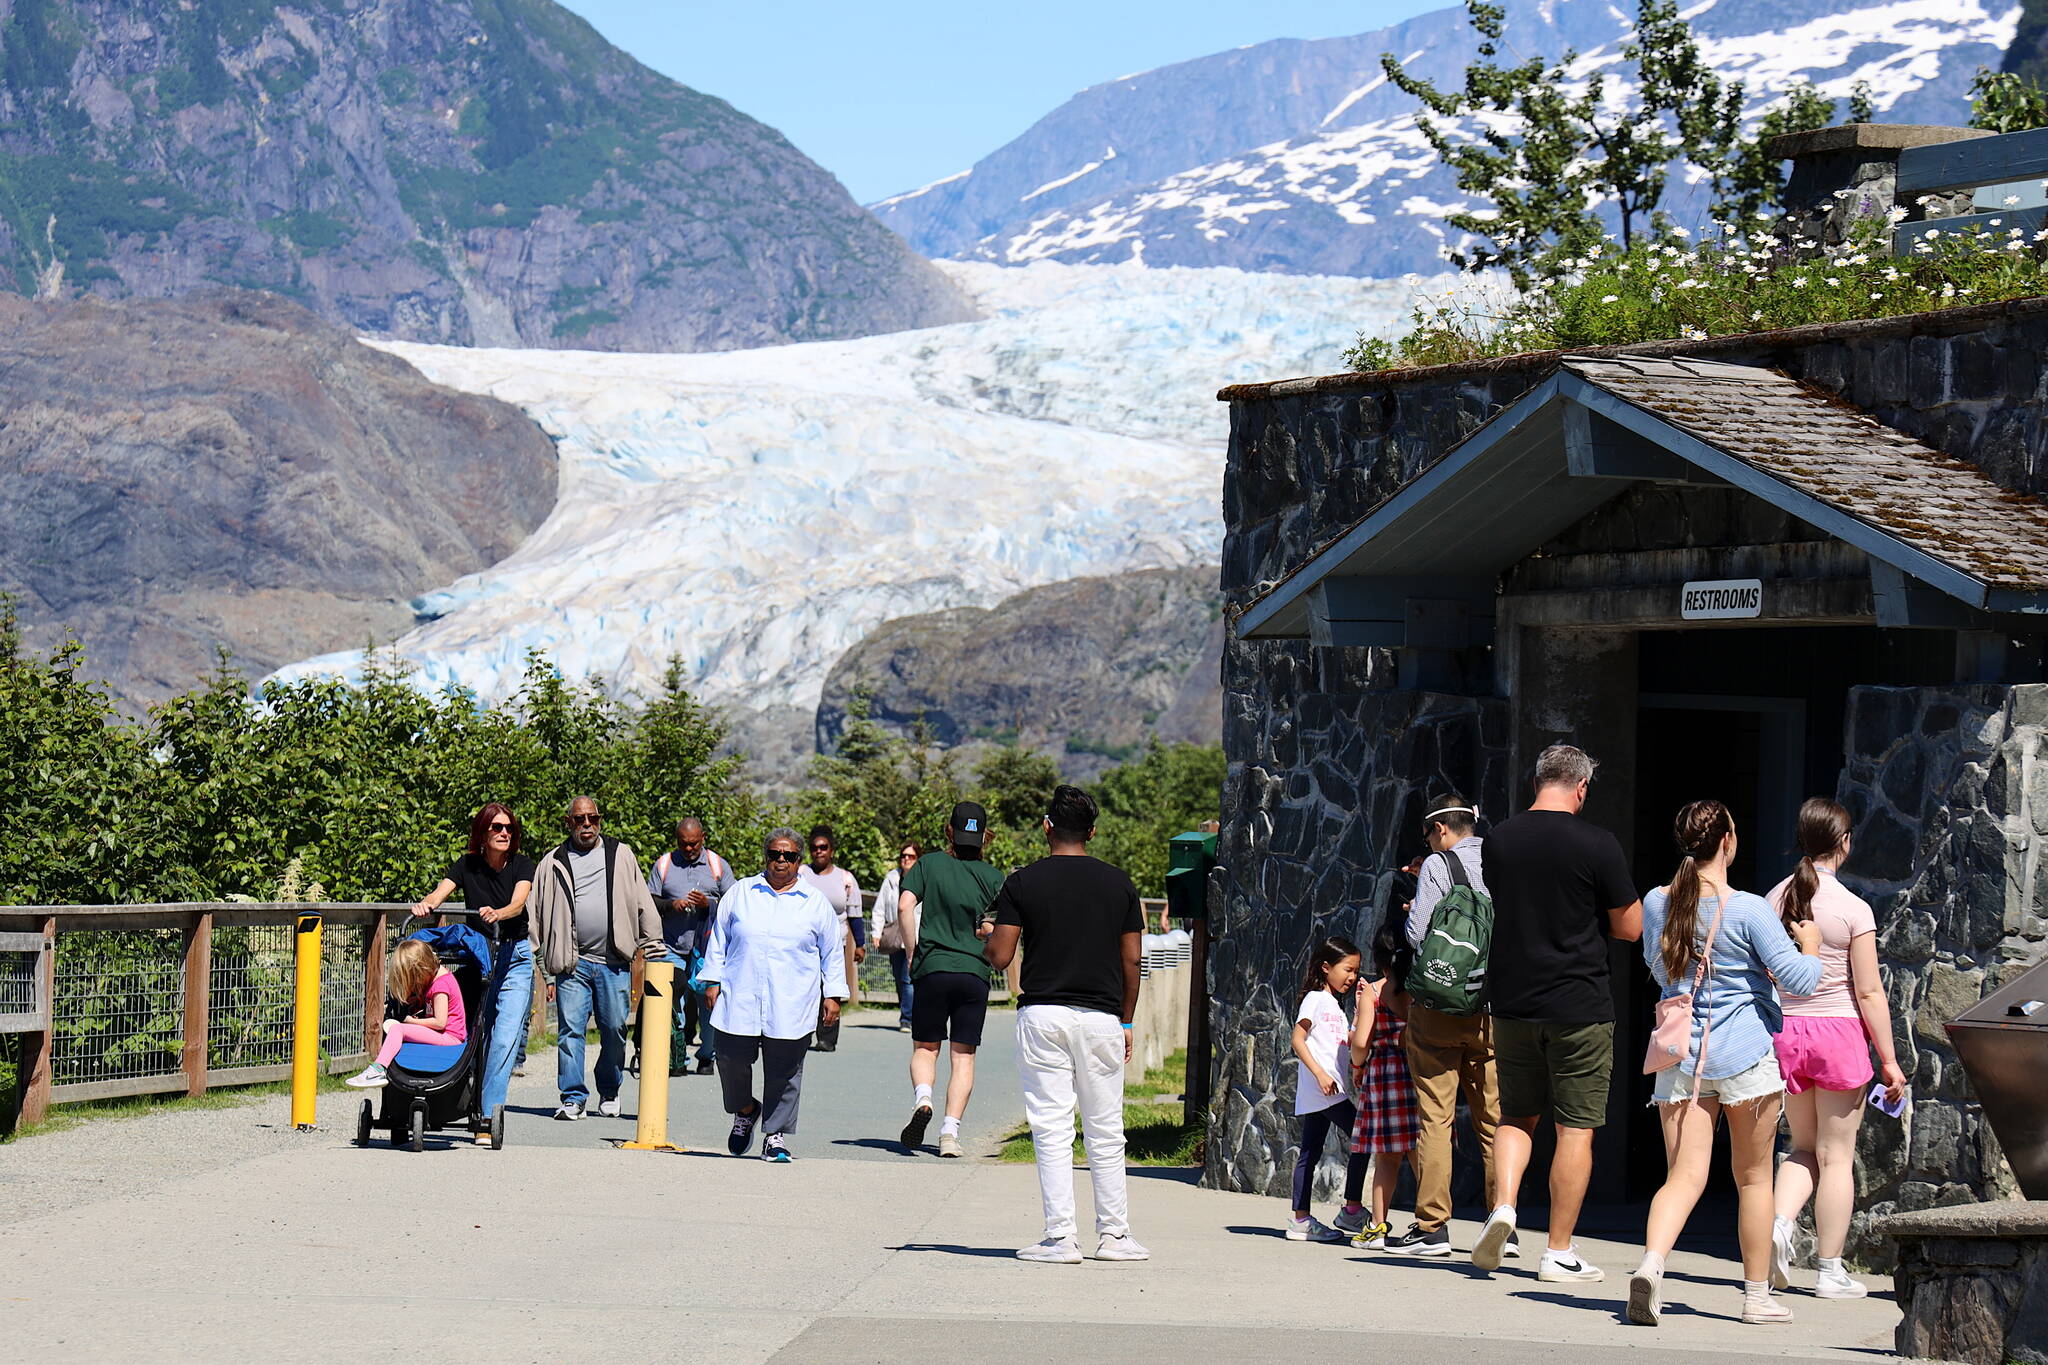 Clarise Larson / Juneau Empire
A crowd of visitors tours the Mendenhall Glacier on Friday. Officials announced Friday limits on commercial tours are being imposed as capacity limits are being rapidly reached, which will impact the second half of the summer tourism season. A plan by the U.S. Forest Service to overhaul the facilities of the Mendenhall Glacier Recreation Area is now in the final stages, which would replace the existing capacity limits with newly defined management practices.